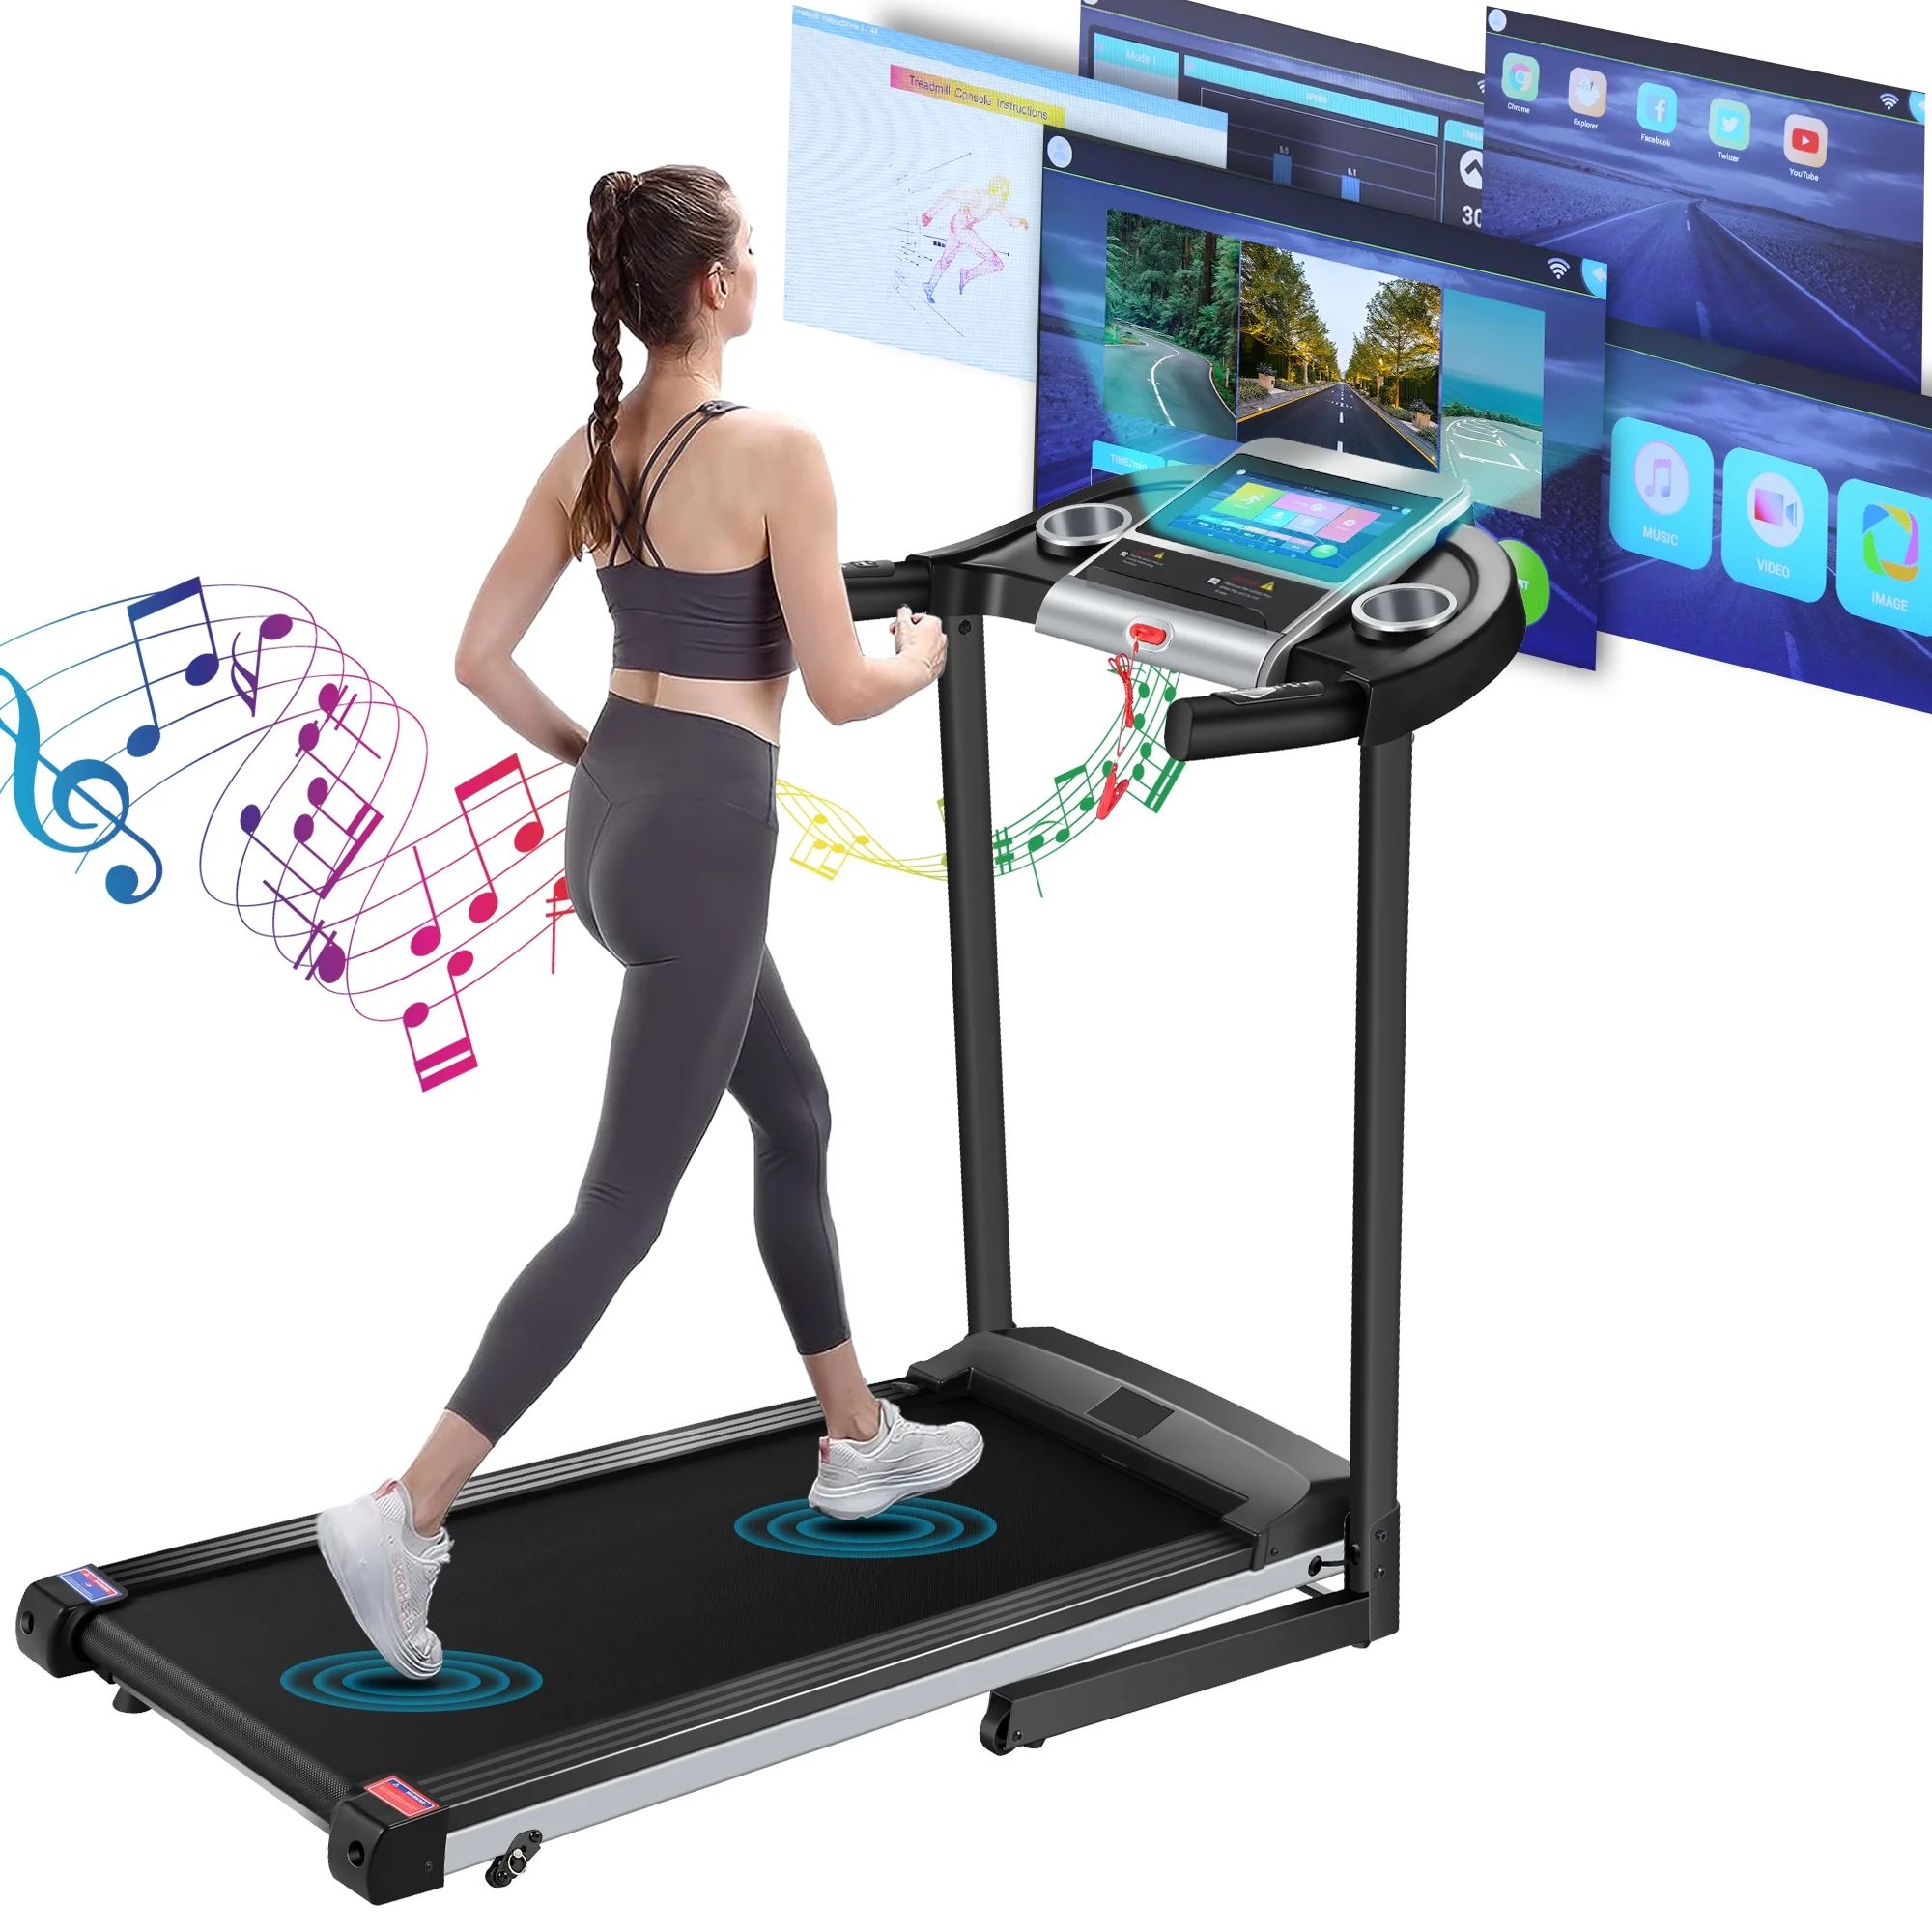 Tikmboex Electric Motorized Treadmill with 3 Incline Levels 3.25HP Brushless Motor WiFi Connectio... | Walmart (US)